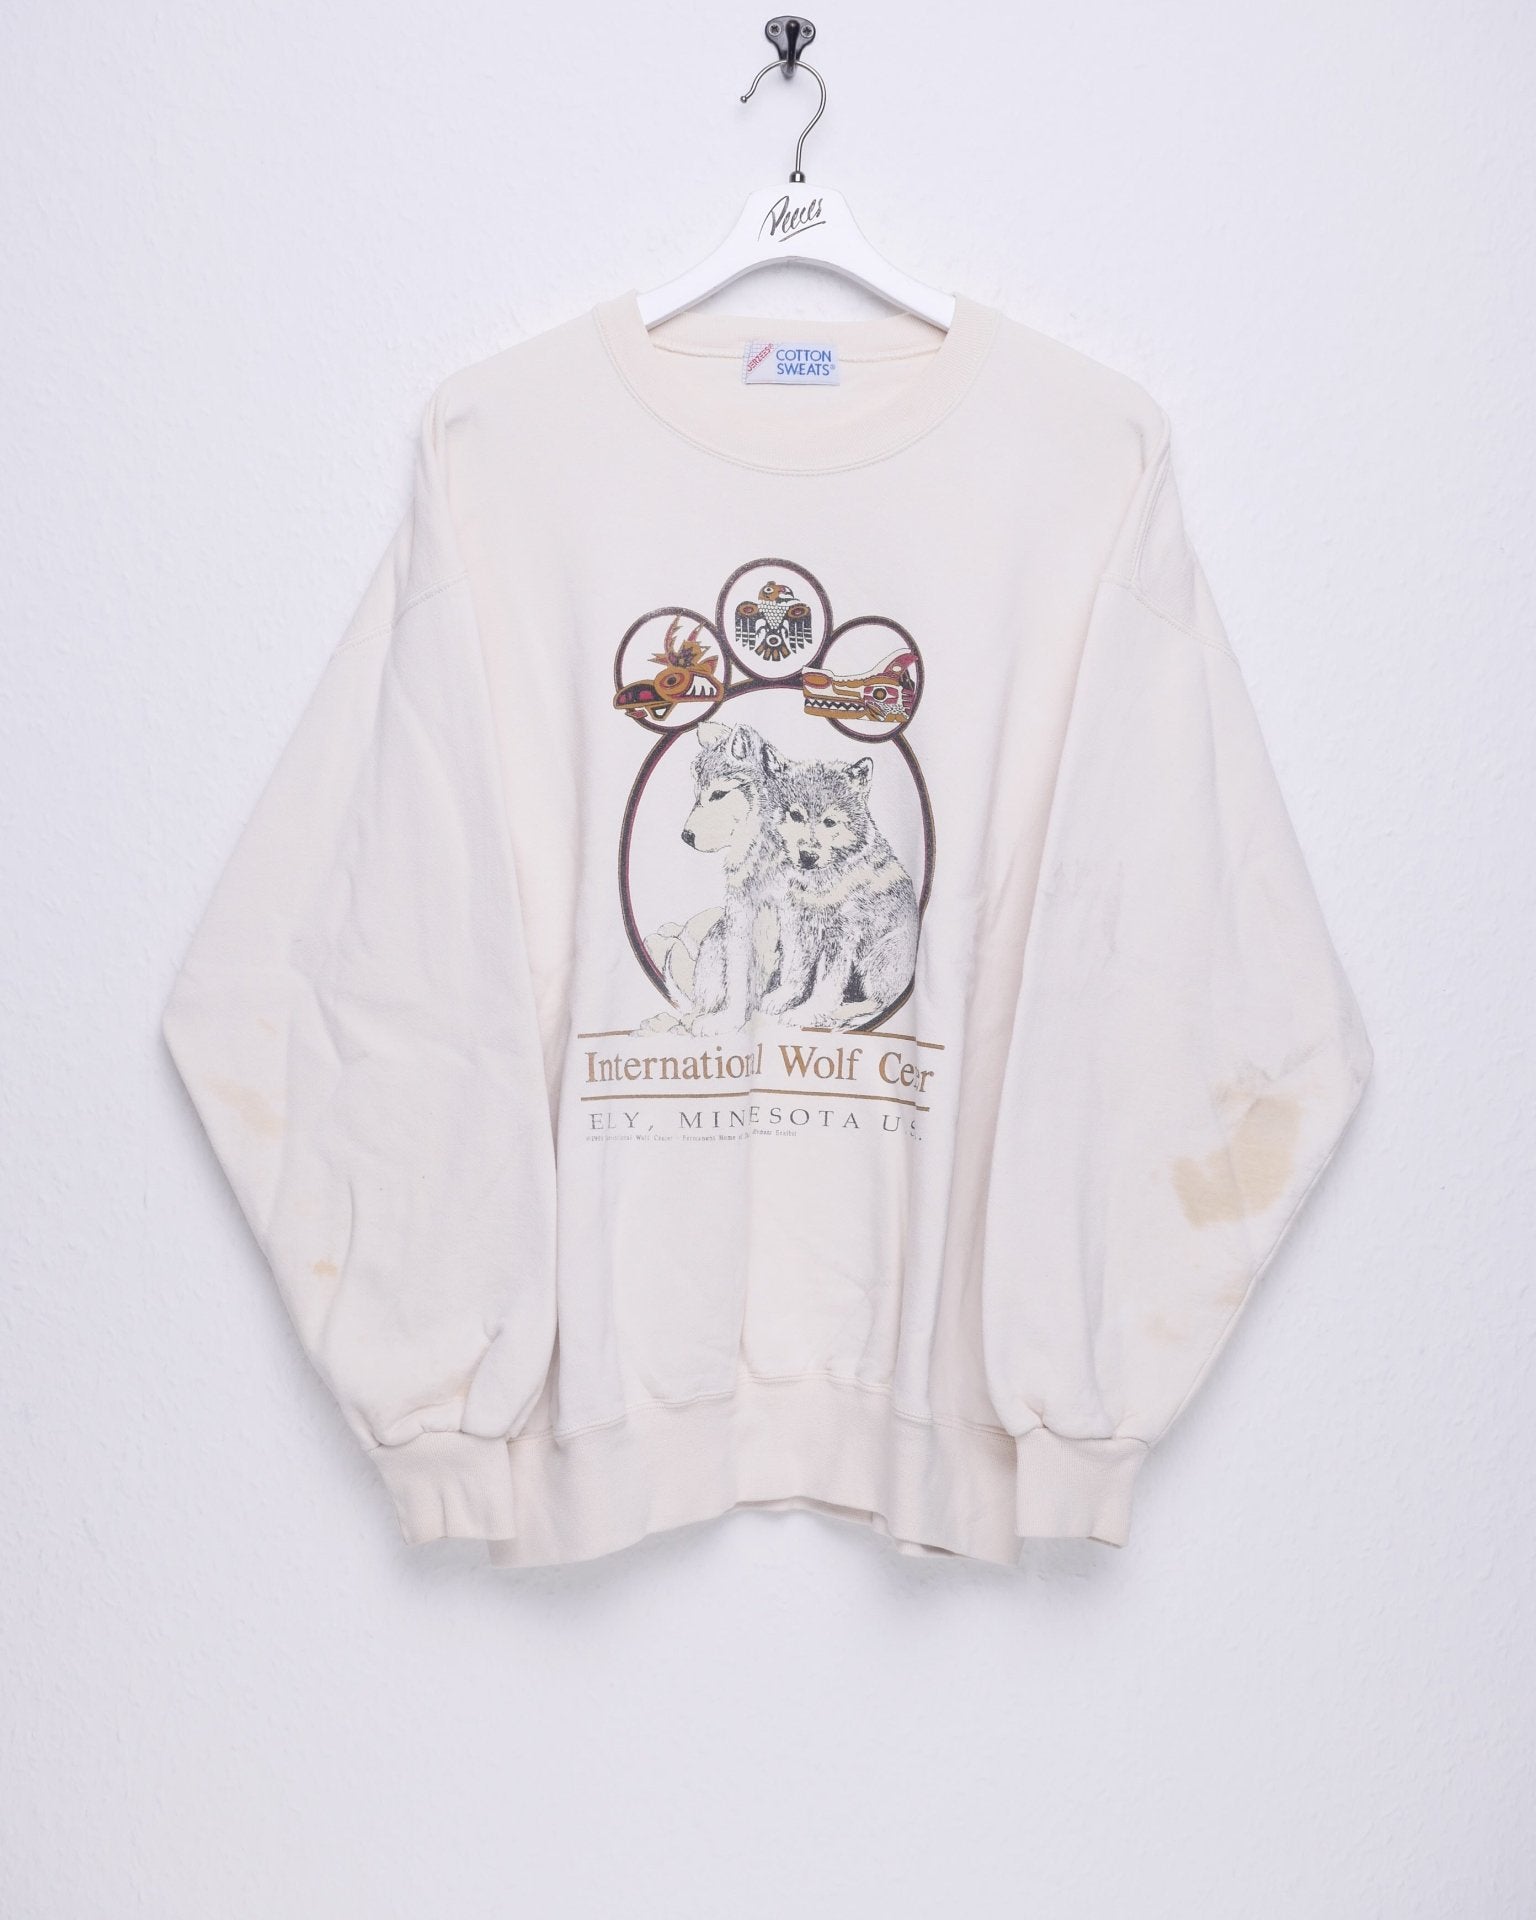 jerzees 'International Wolf Center' printed Graphic White Sweater - Peeces